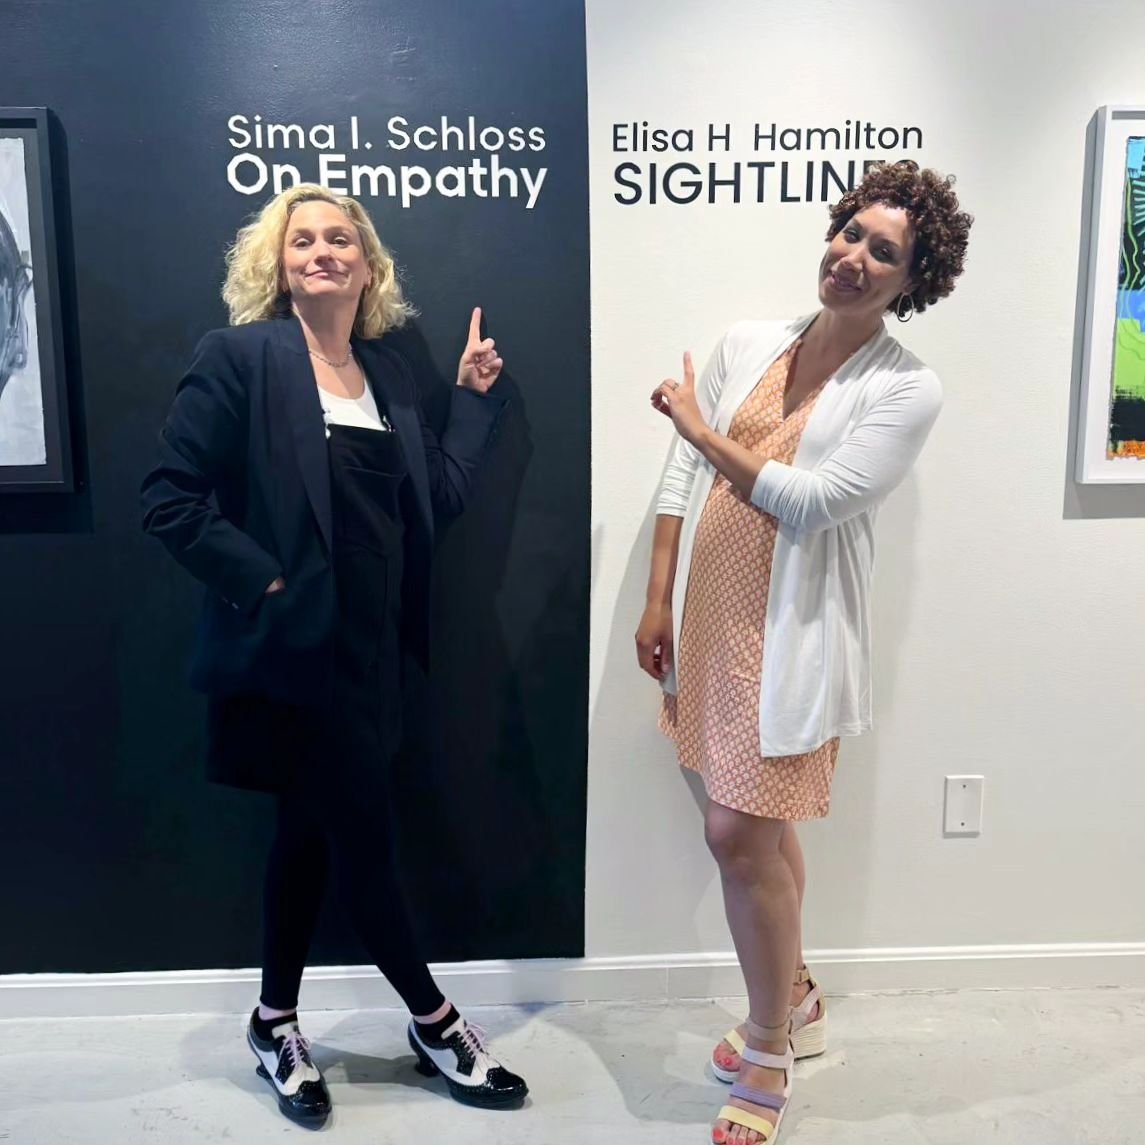 Thank you to everyone who came out for the opening reception of Elisa H. Hamilton's Sightlines &amp; Sima I. Schloss&rsquo;s On Empathy this past Friday.

Both exhibitions will be on view until June 2nd!

@elisahhamilton
@simzee

#sightlines #onempat